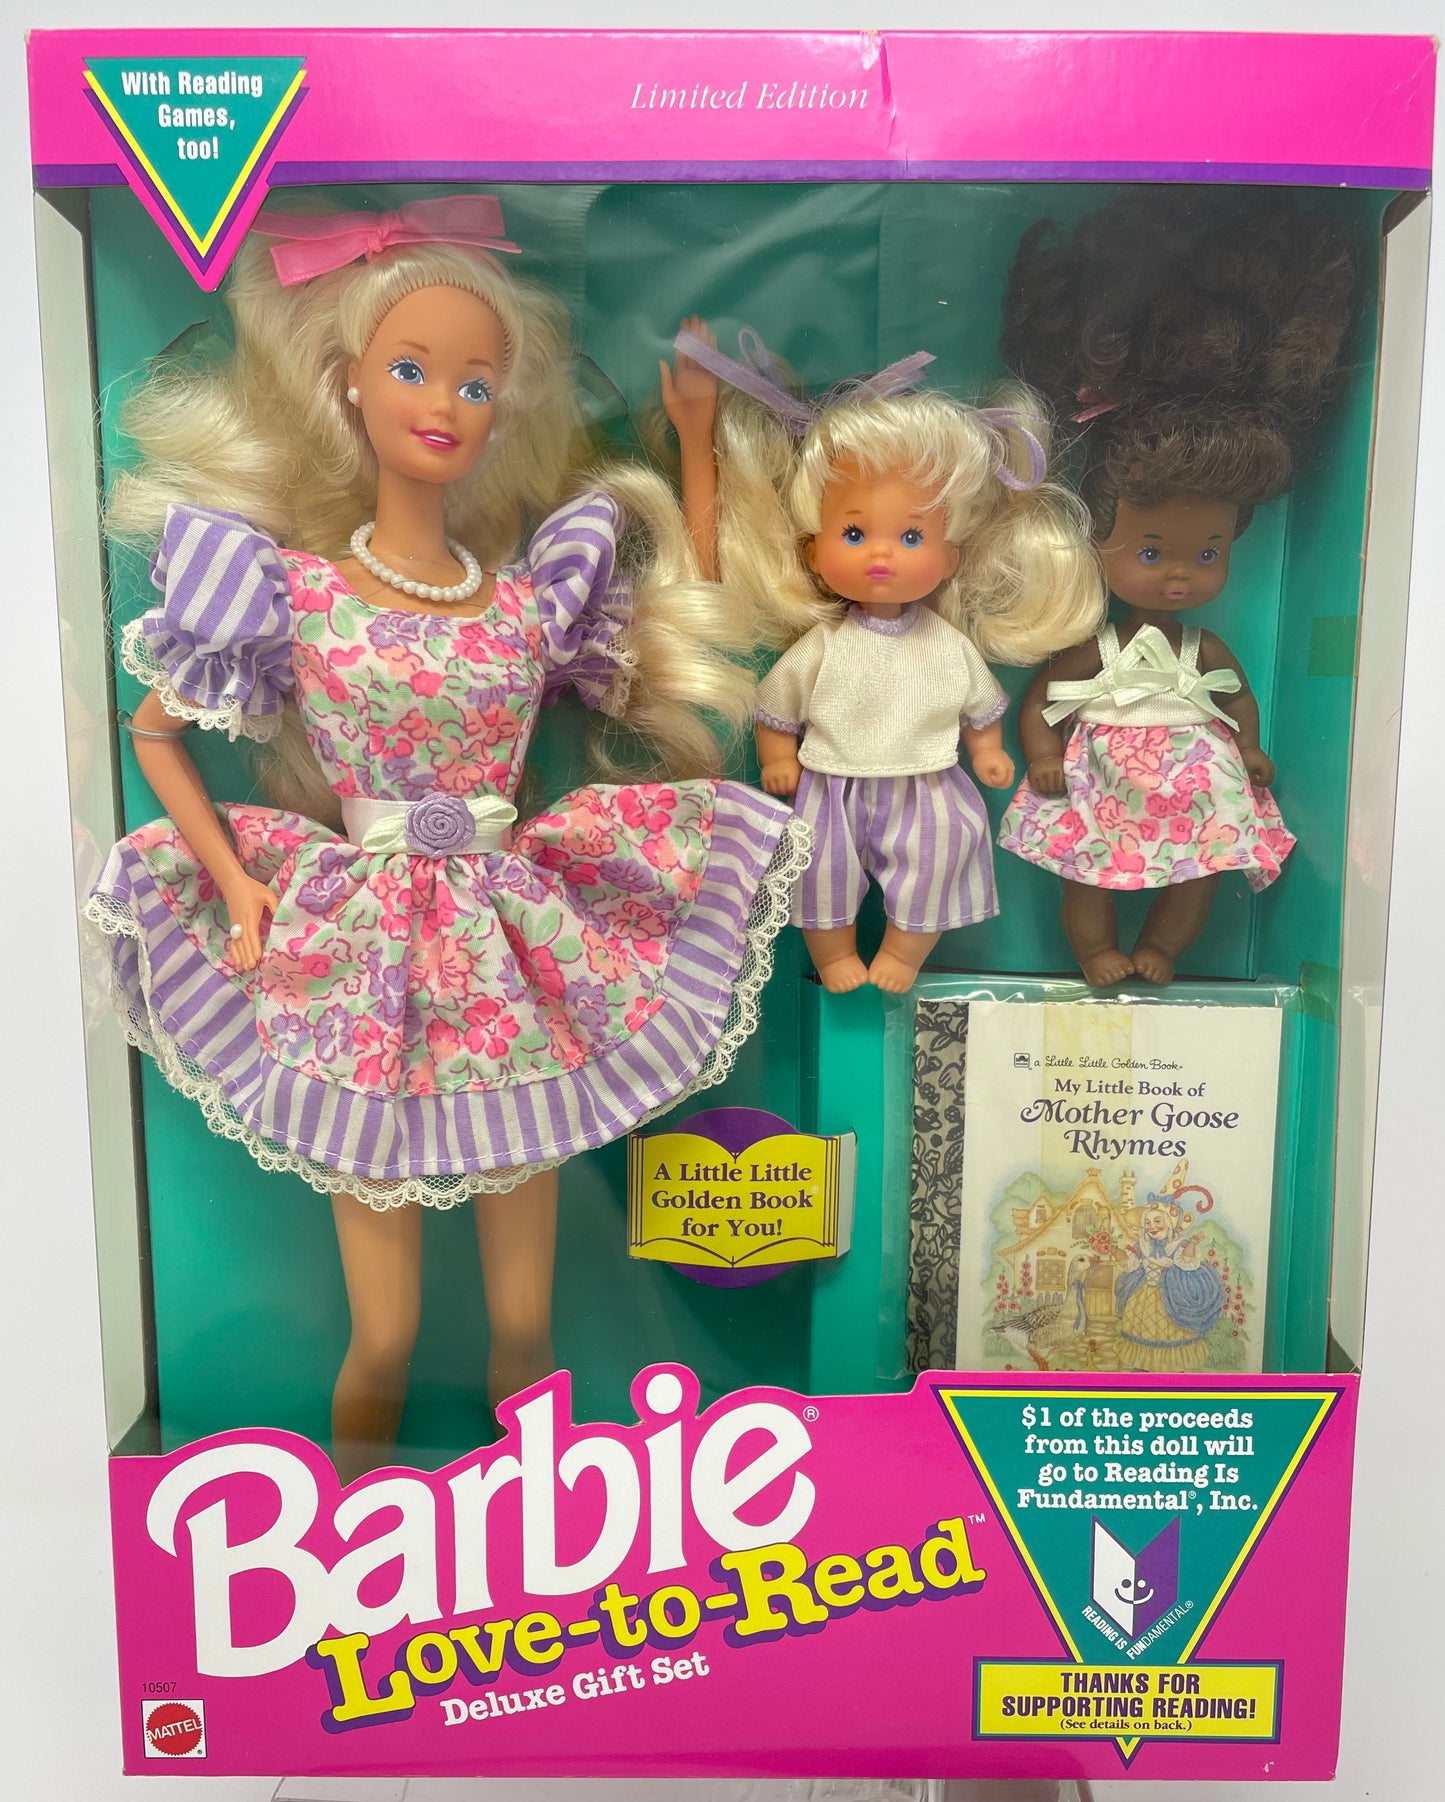 BARBIE LOVE TO READ DELUXE GIFT SET - BLONDE - LIMITED EDITION - #10507 - MATTEL 1992